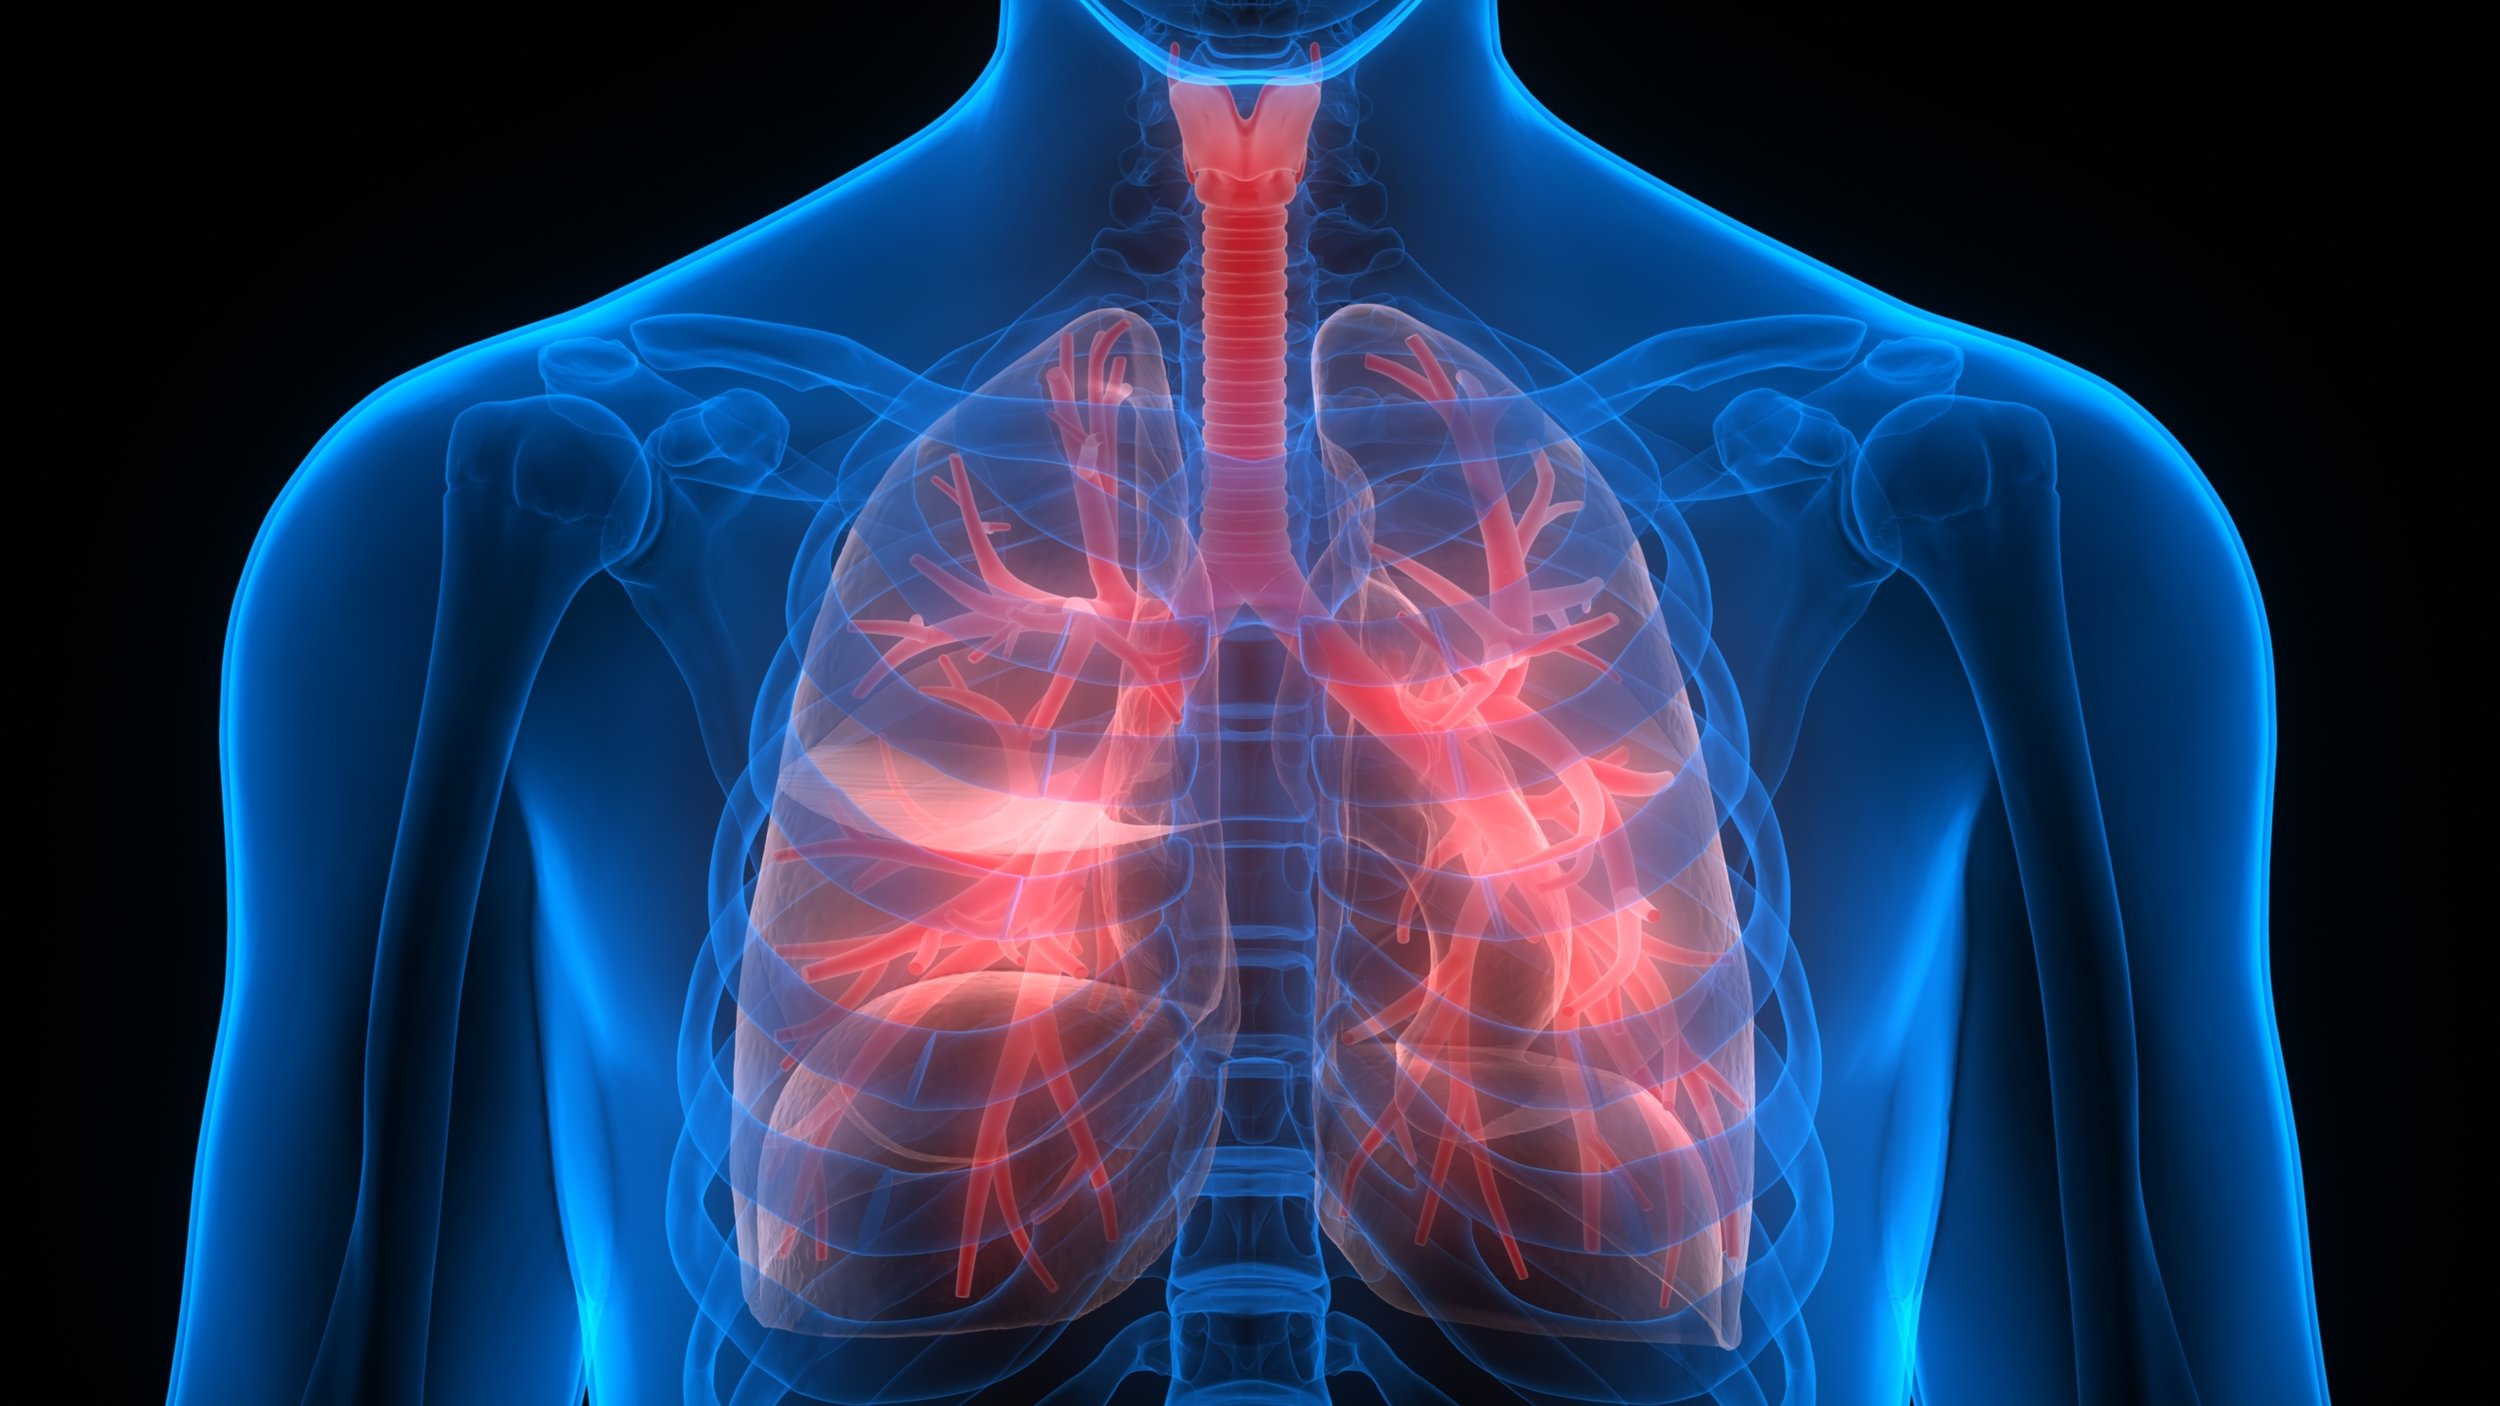 Newly developed nanoparticles help fight lung cancer in animal model